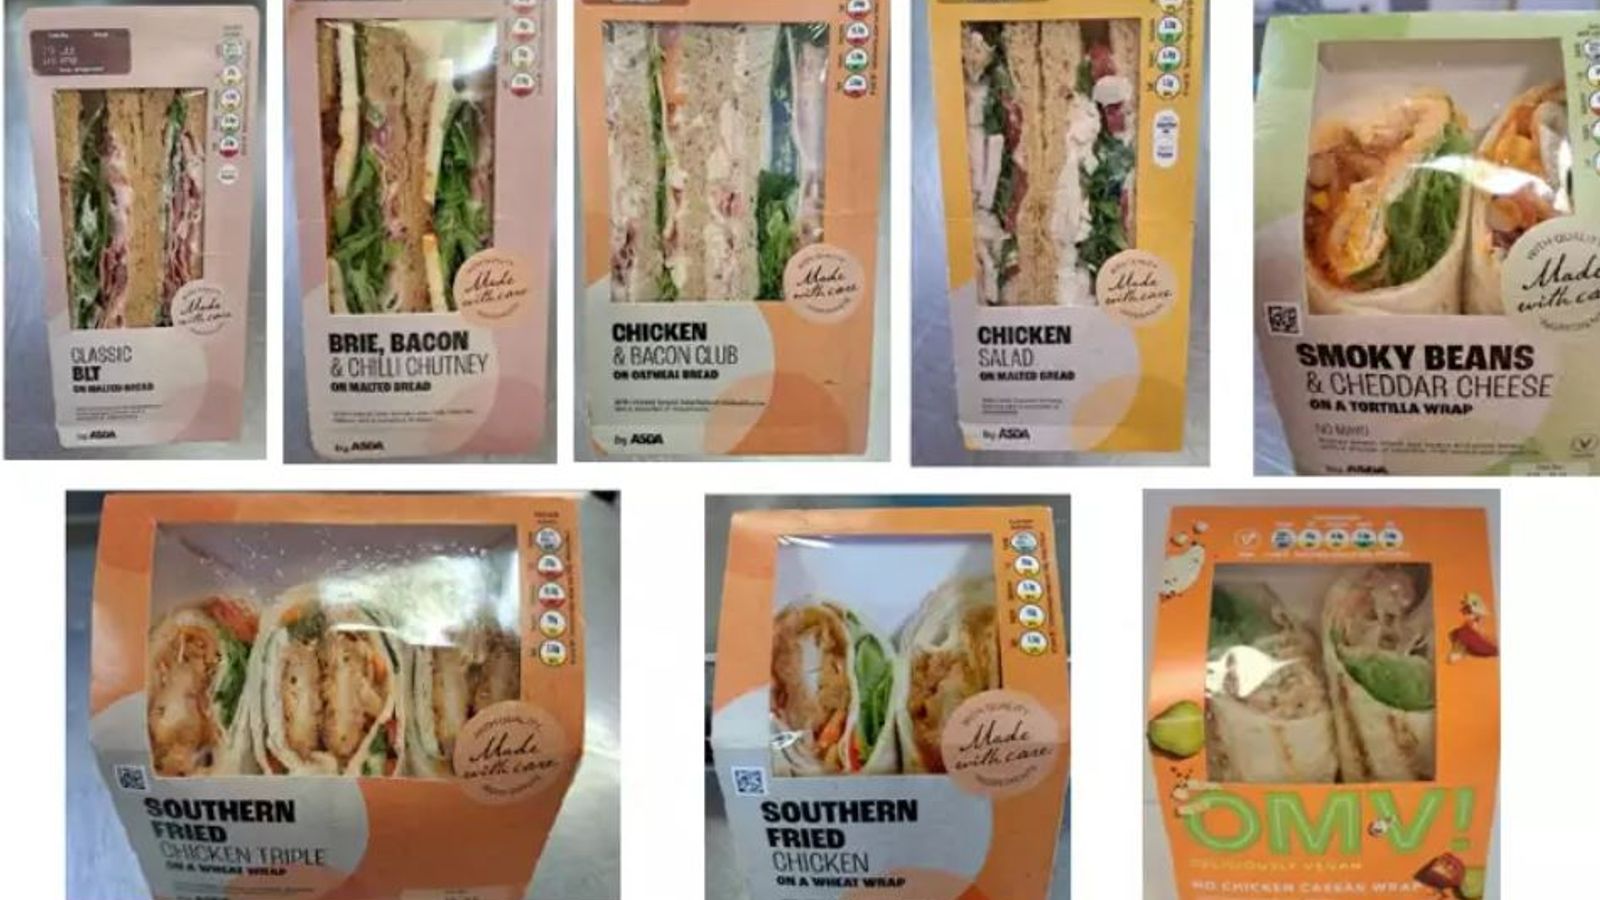 E.coli: Full list of products recalled by sandwich suppliers